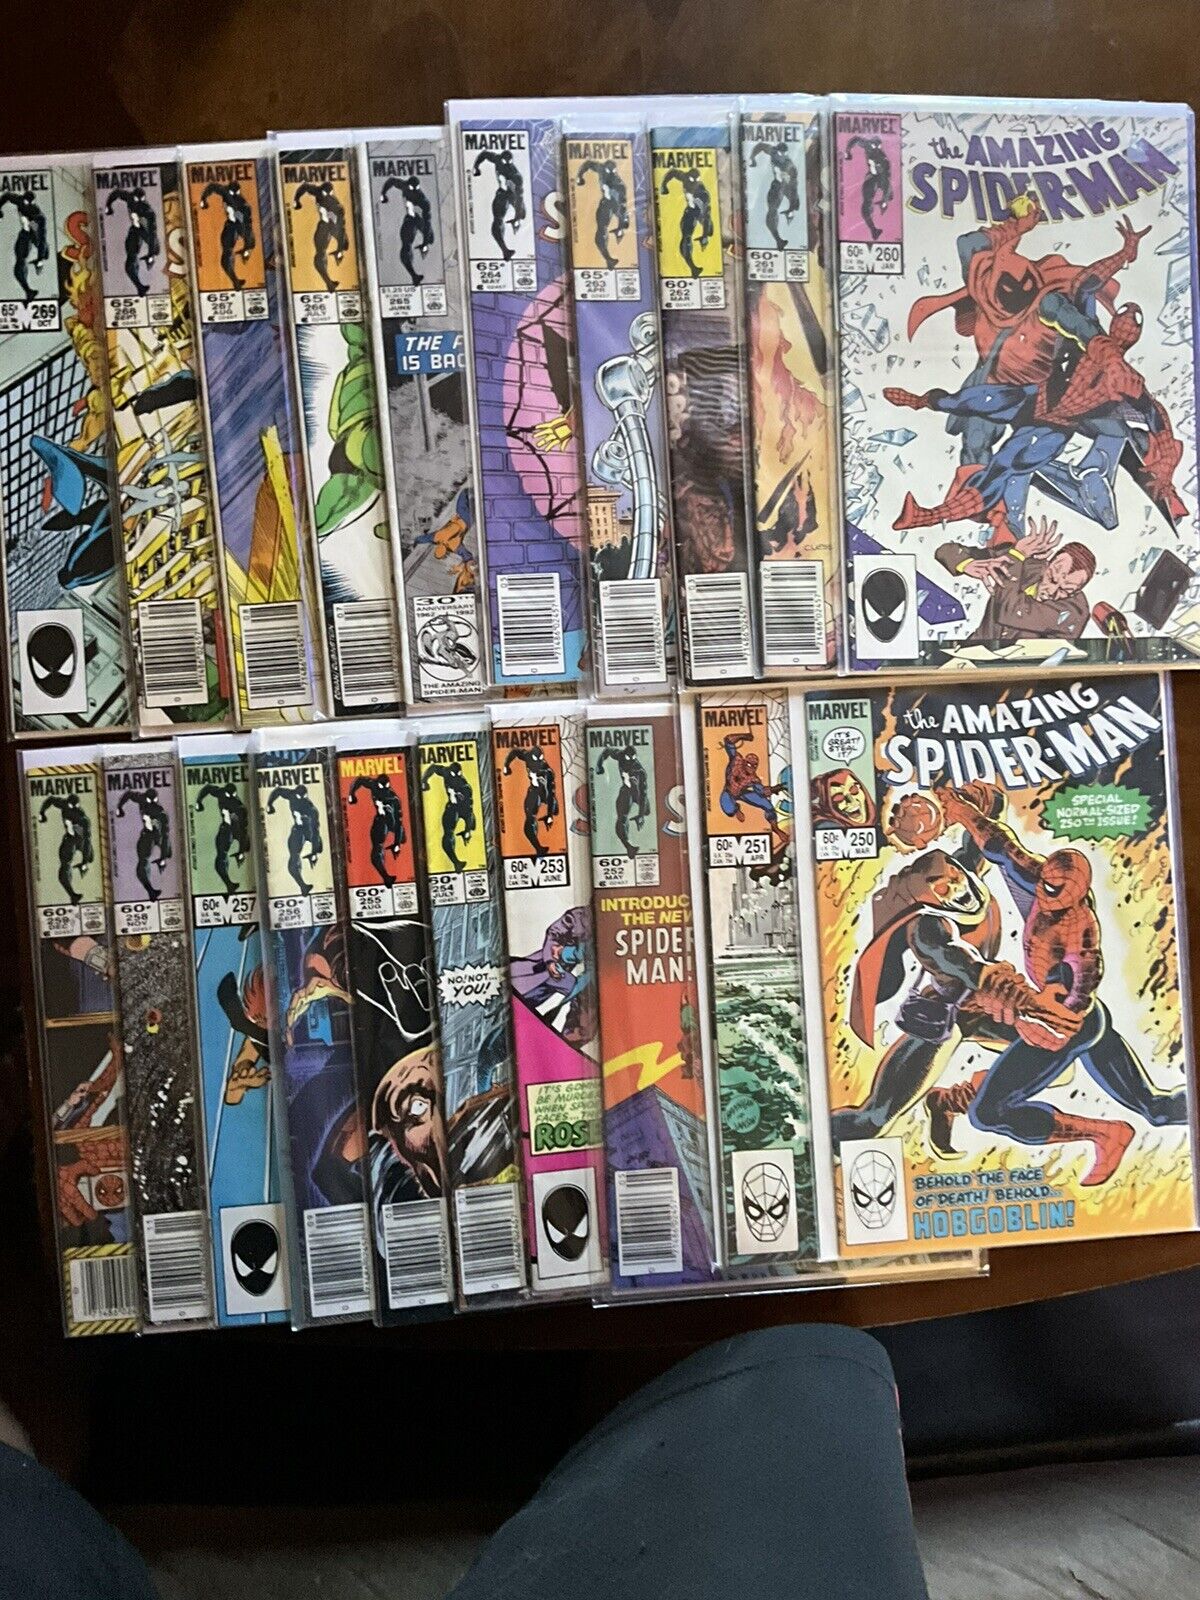 The Amazing Spider Man 20 Bk lot. Complete Run , Every Issue, #s 250-269.